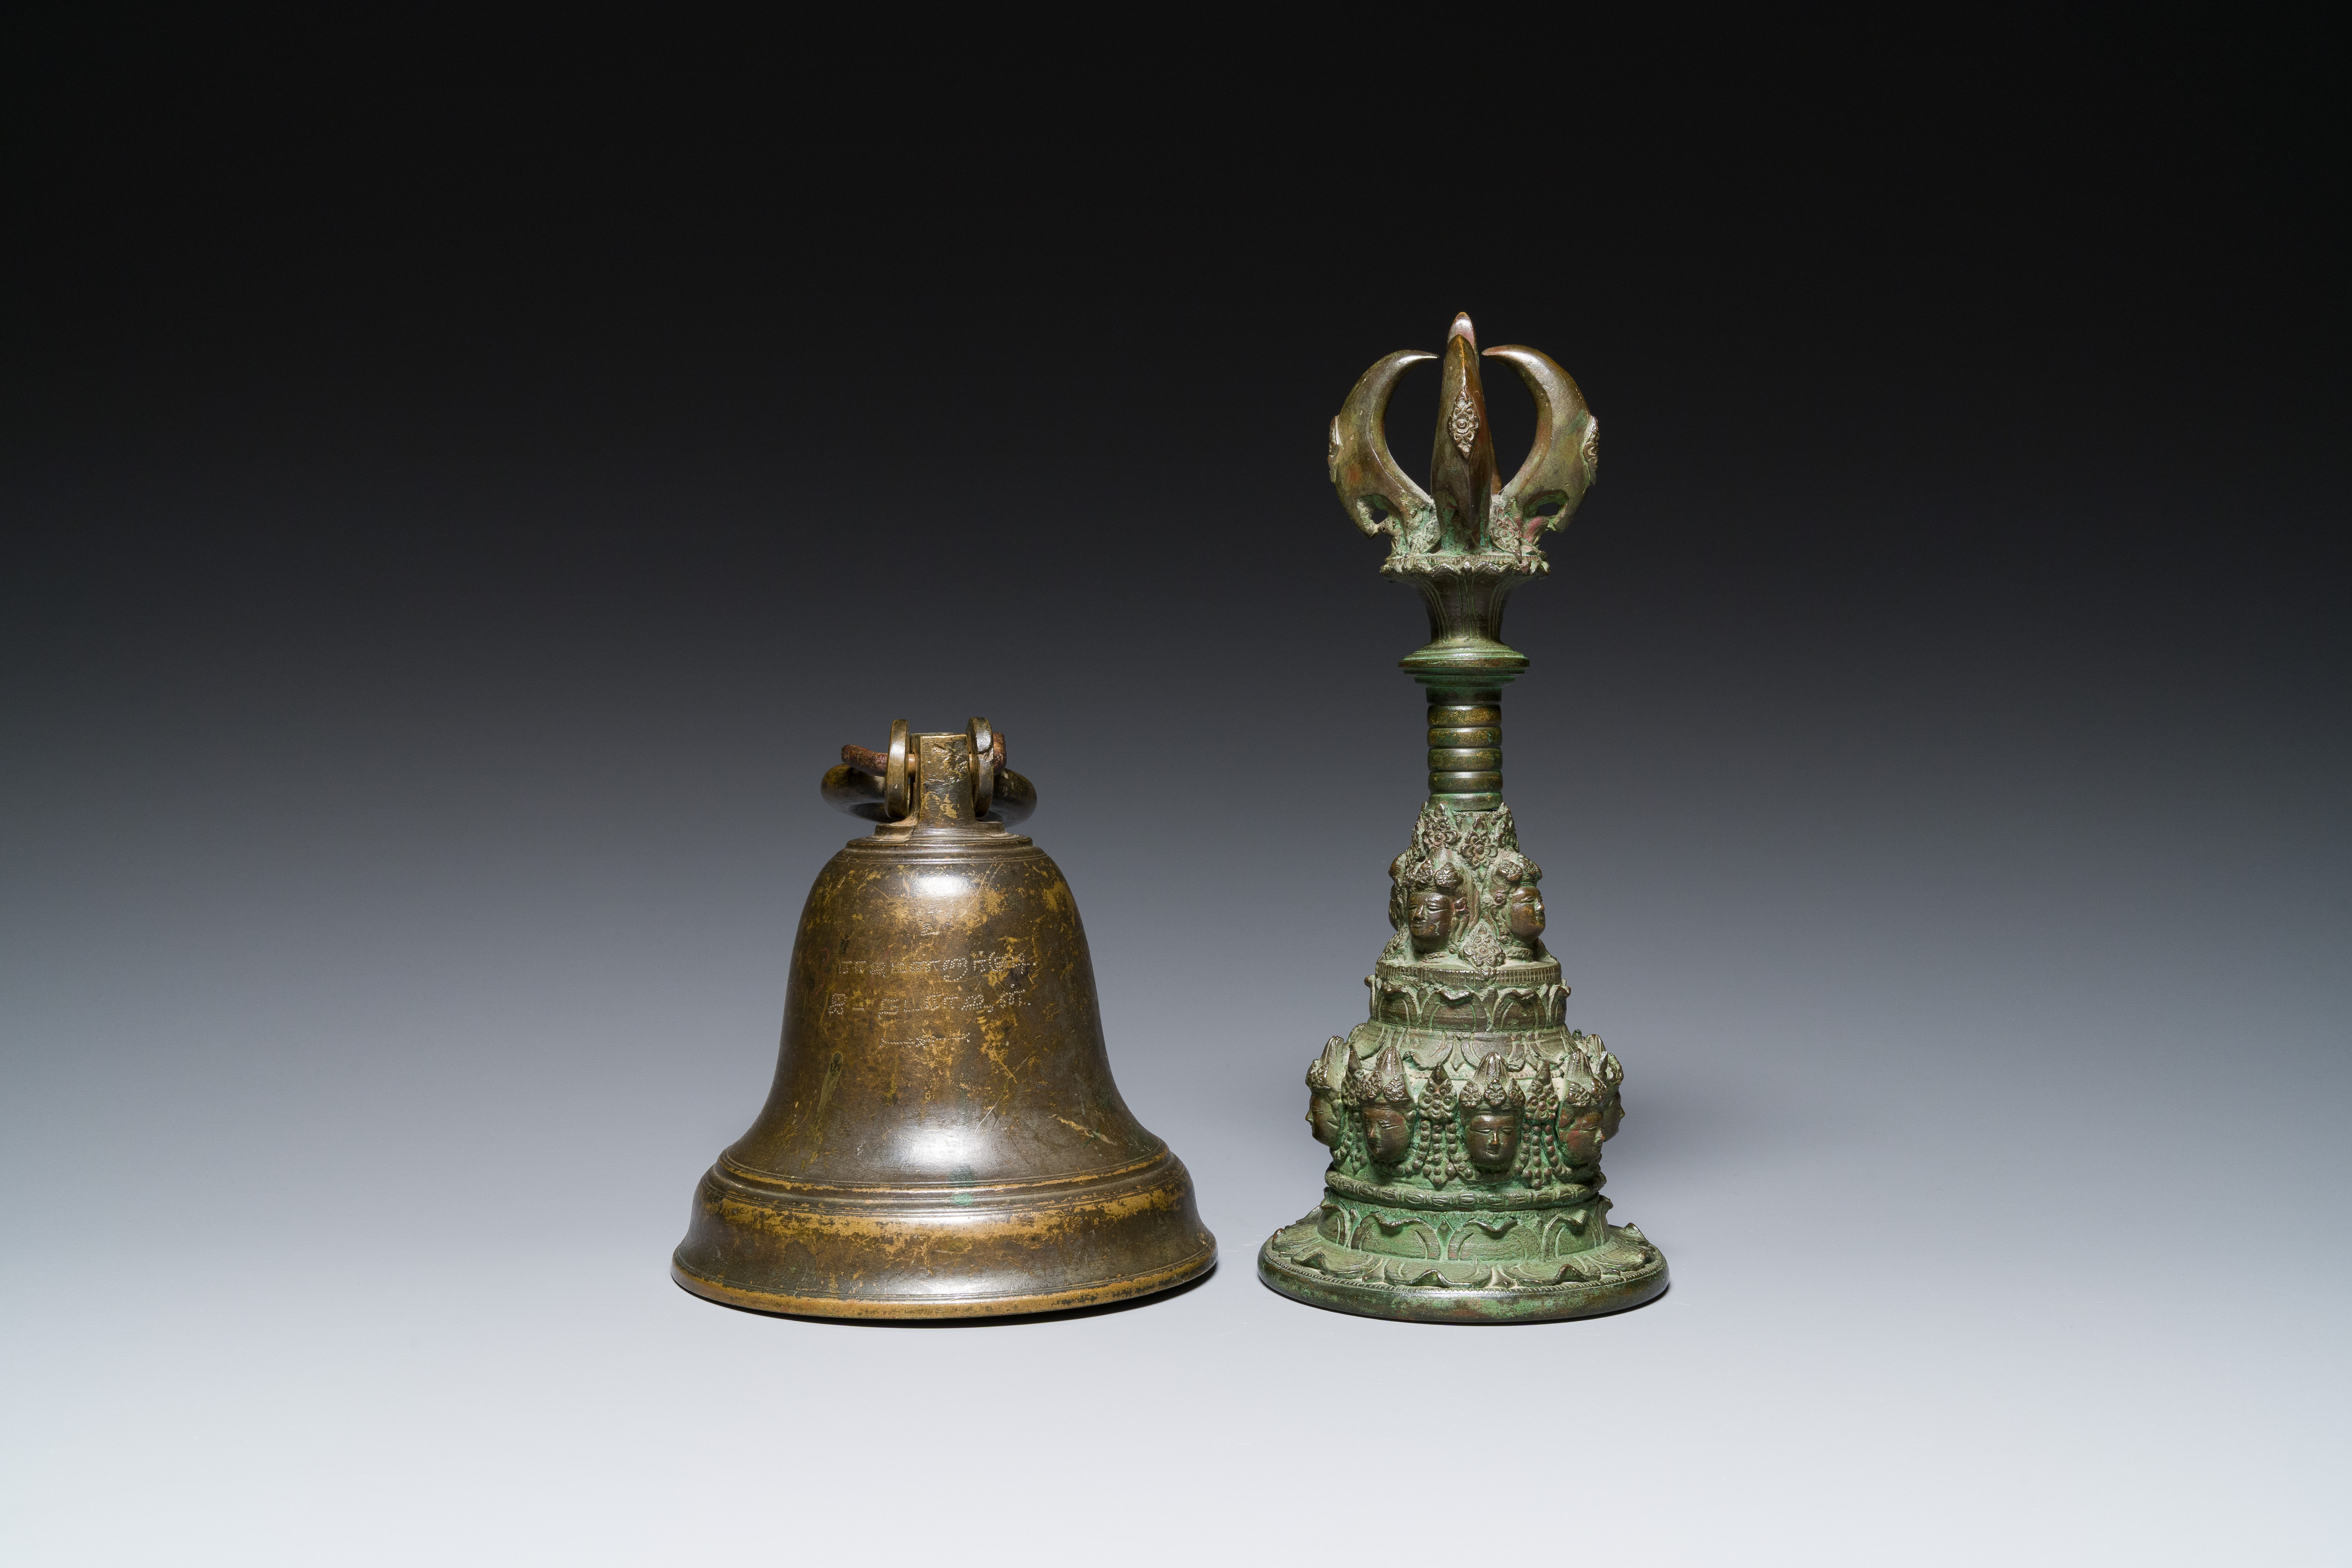 A bronze bell and a ceremonial hand bell, South Asia and Southeast Asia, 19th C. or earlier - Image 6 of 21